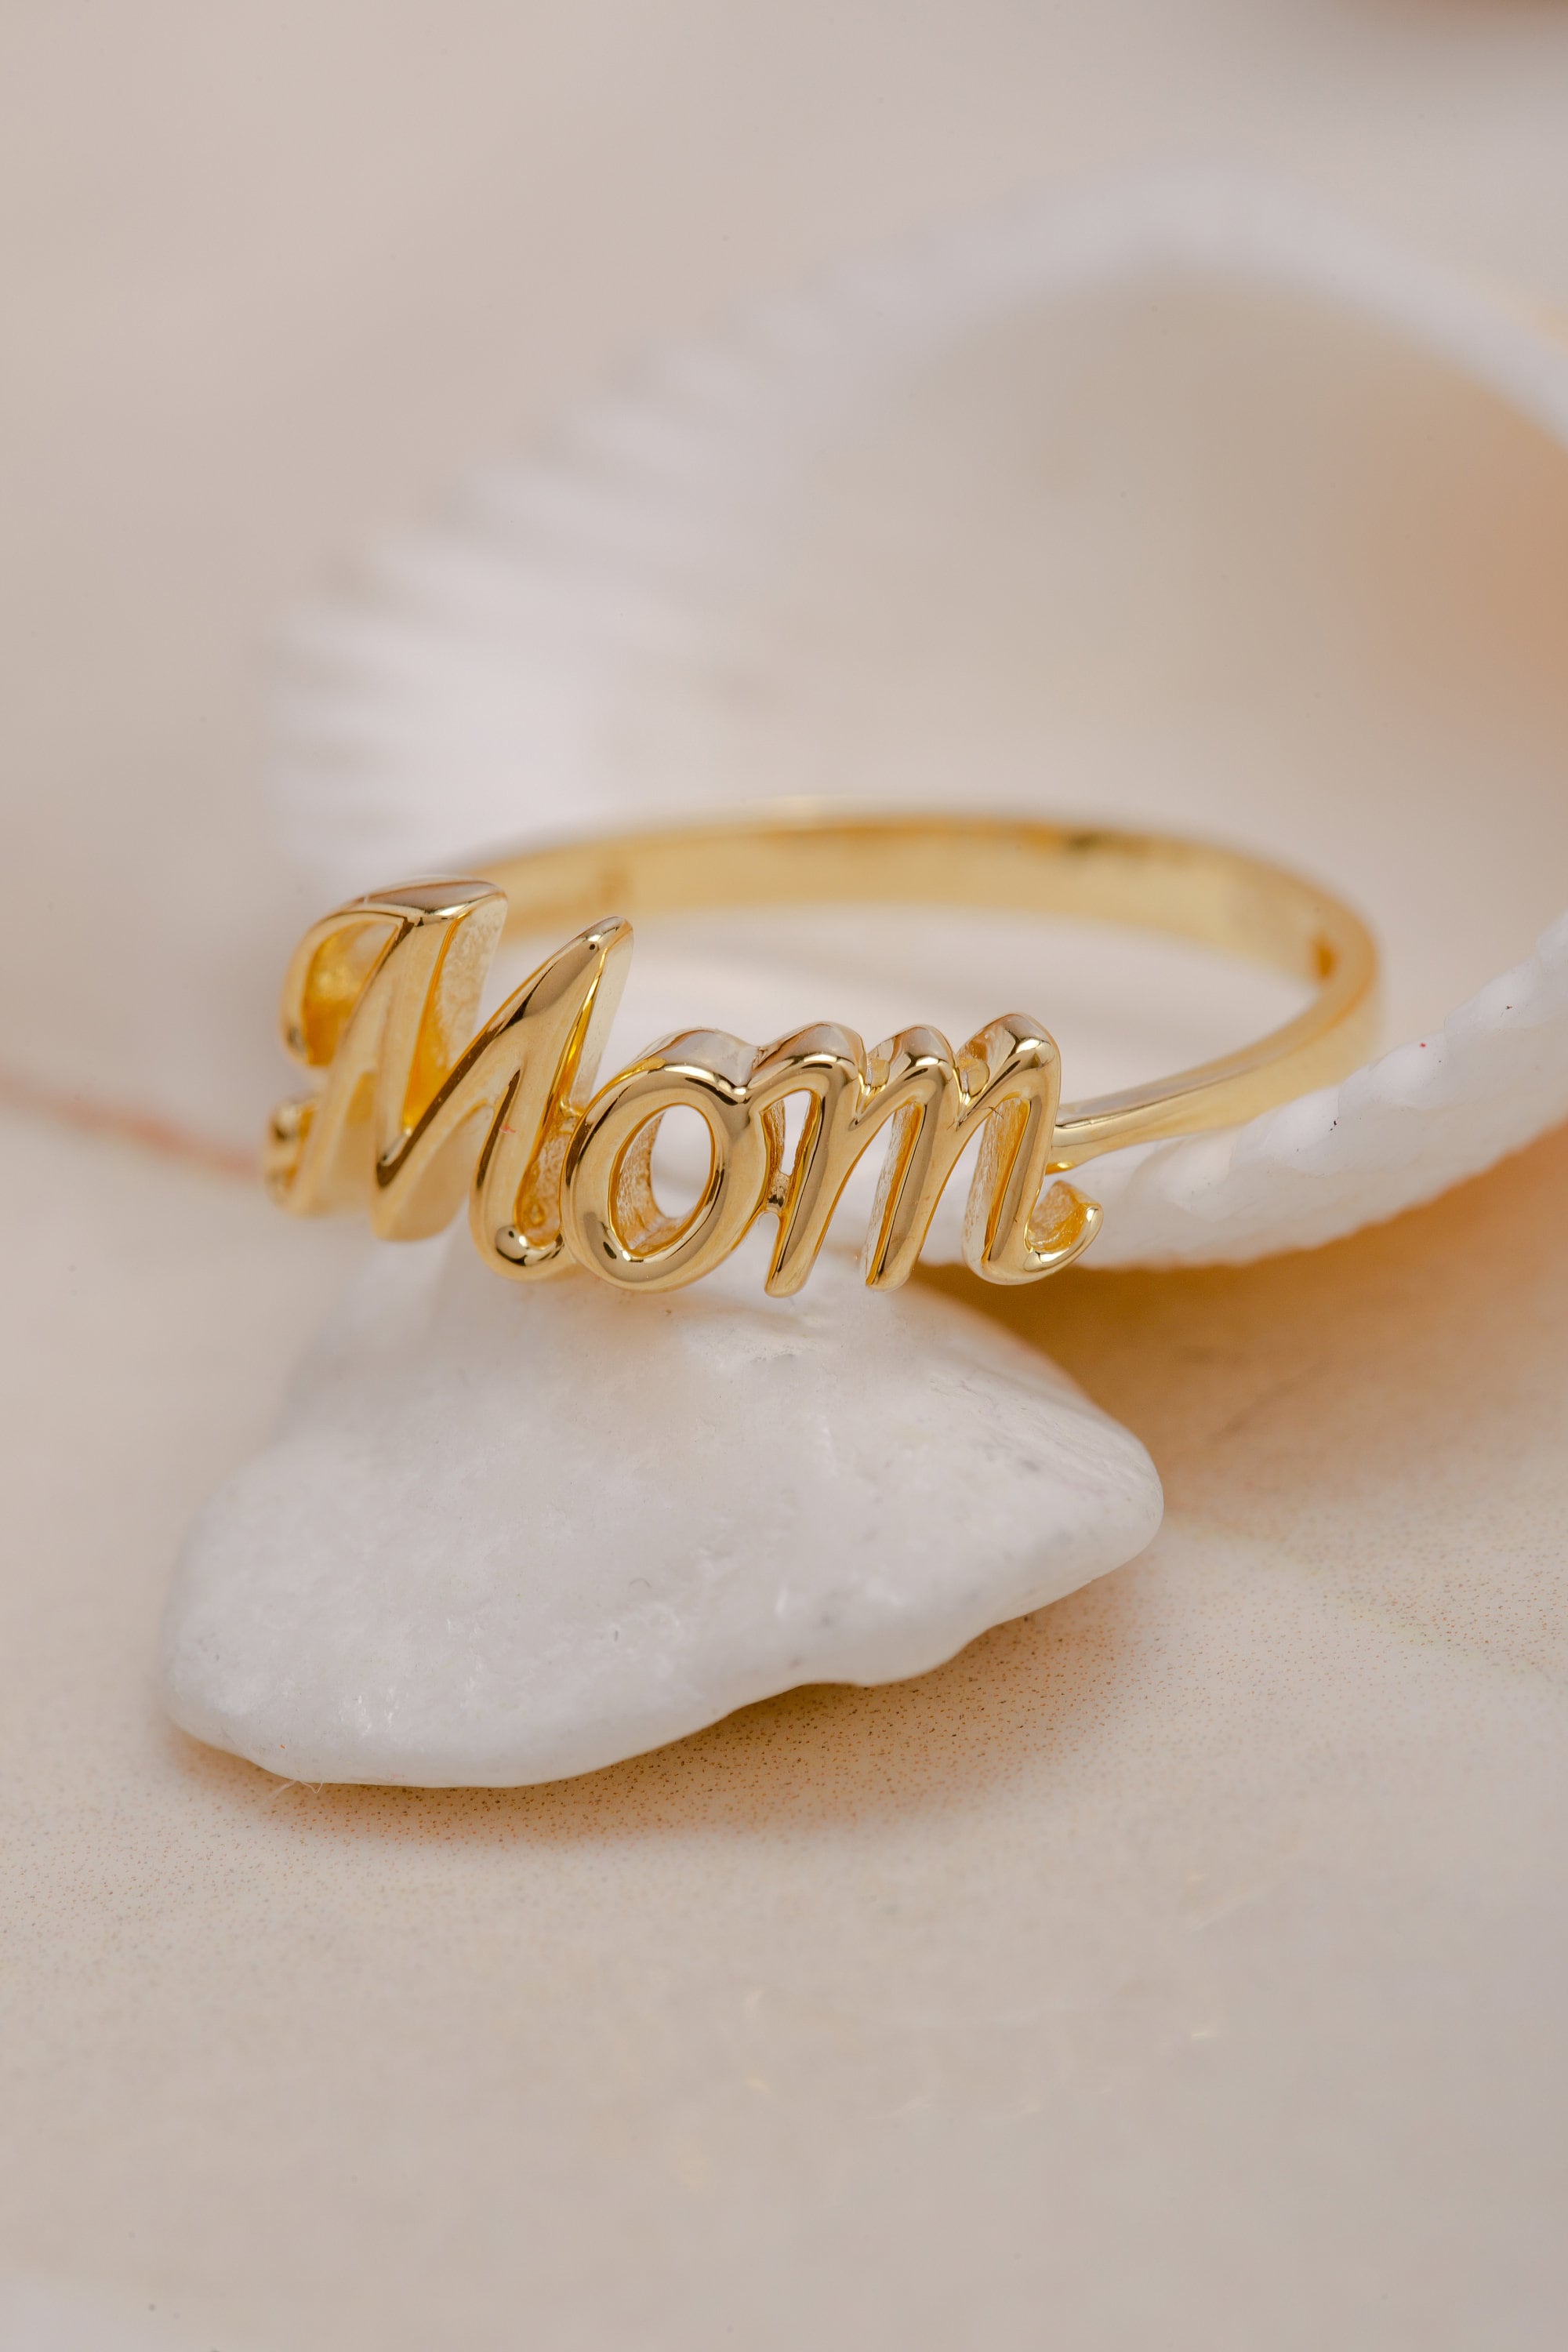 14K Elegant Mom Ring in Gold, Thoughtful Gift for Mothers, Jewelry for Moms, 925 Sterling Silver Family Jewelry, Mother's Day Ring Gift